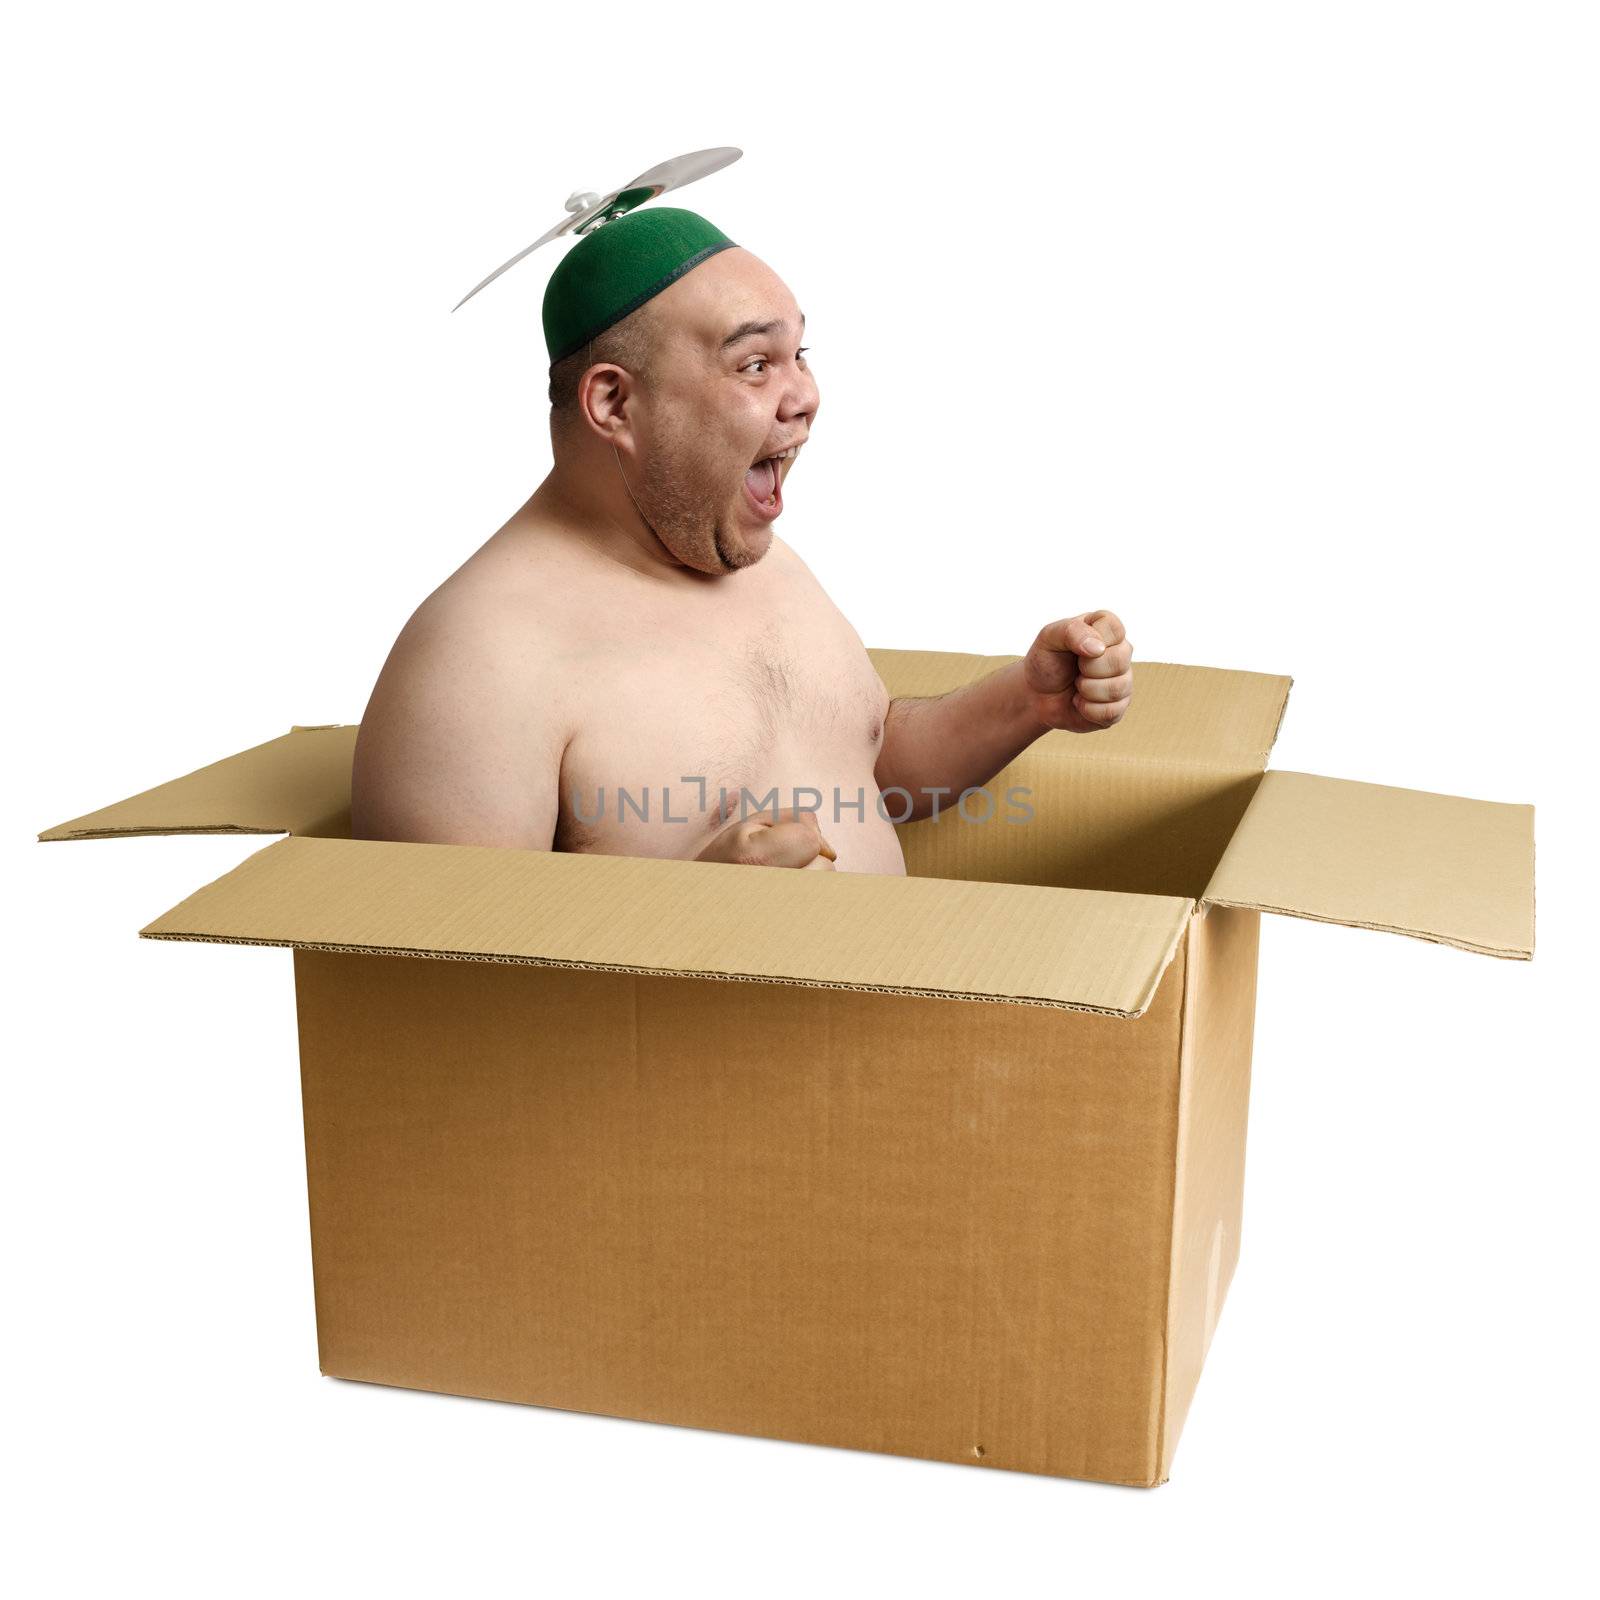 An adult male in his 30's playing airplane in an old cardboard box.